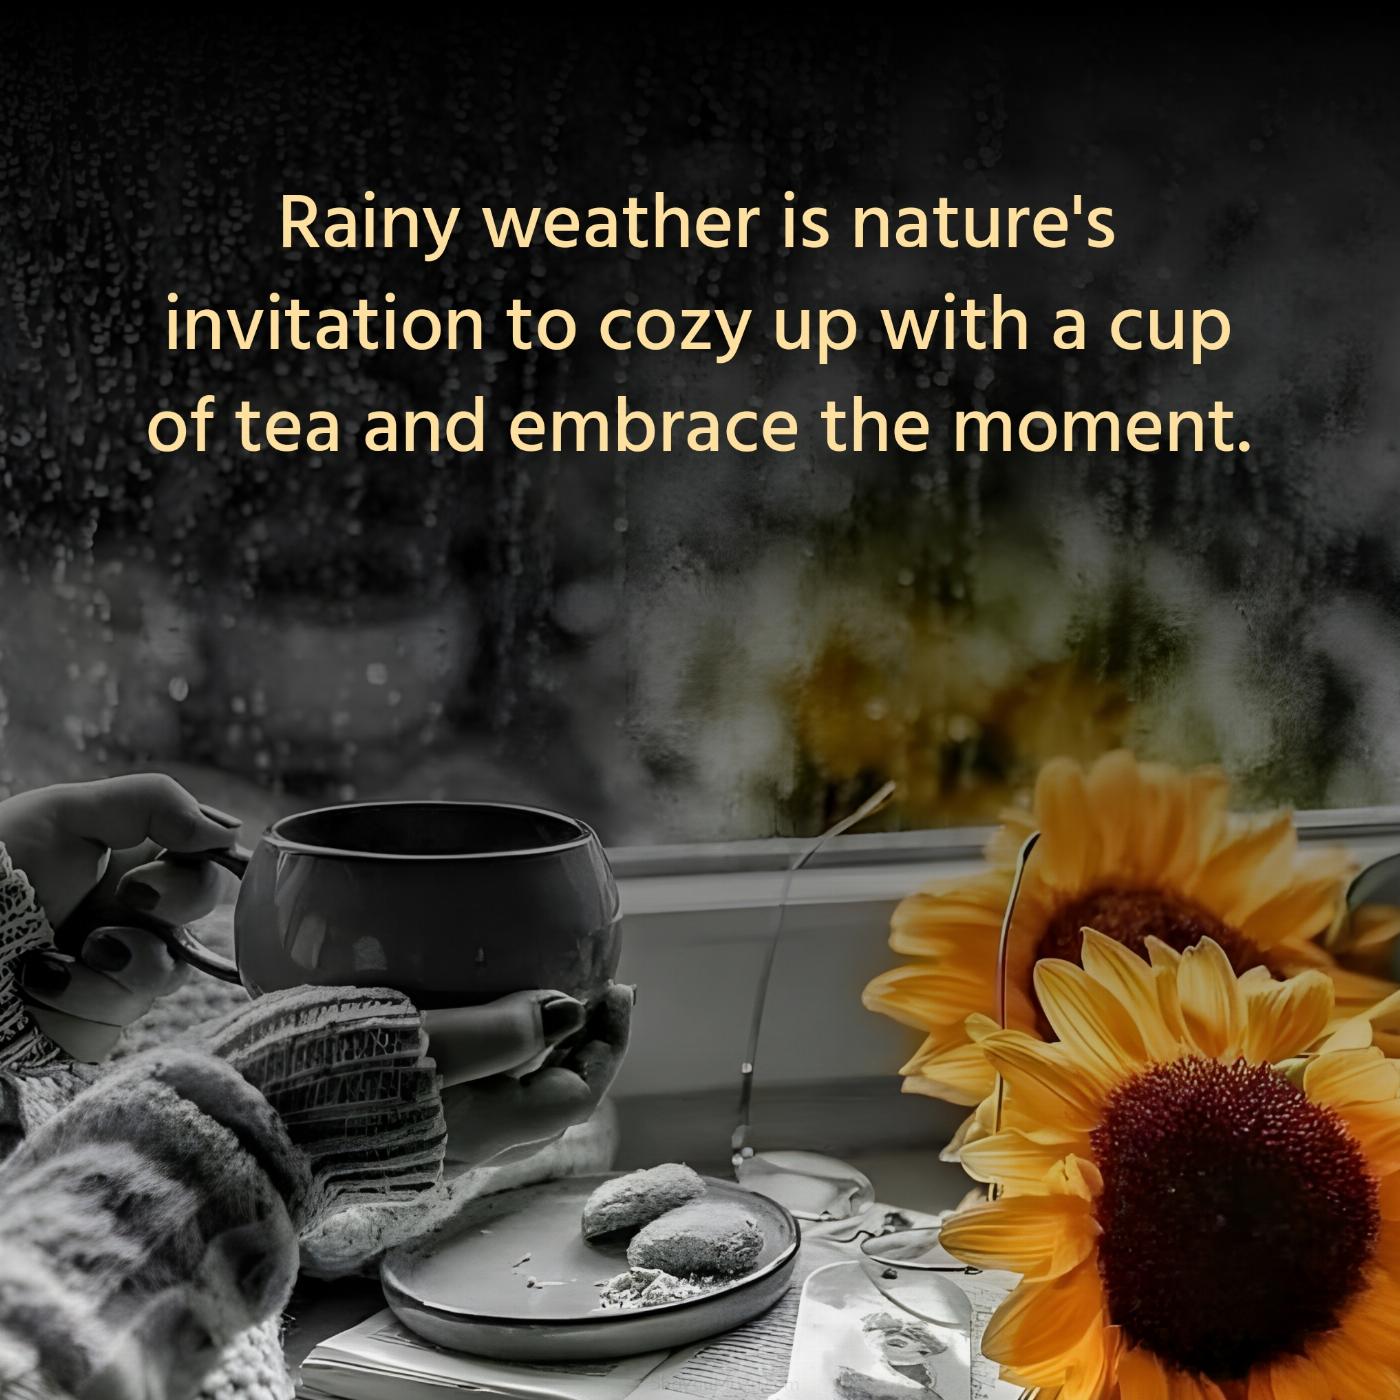 Rainy weather is nature's invitation to cozy up with a cup of tea